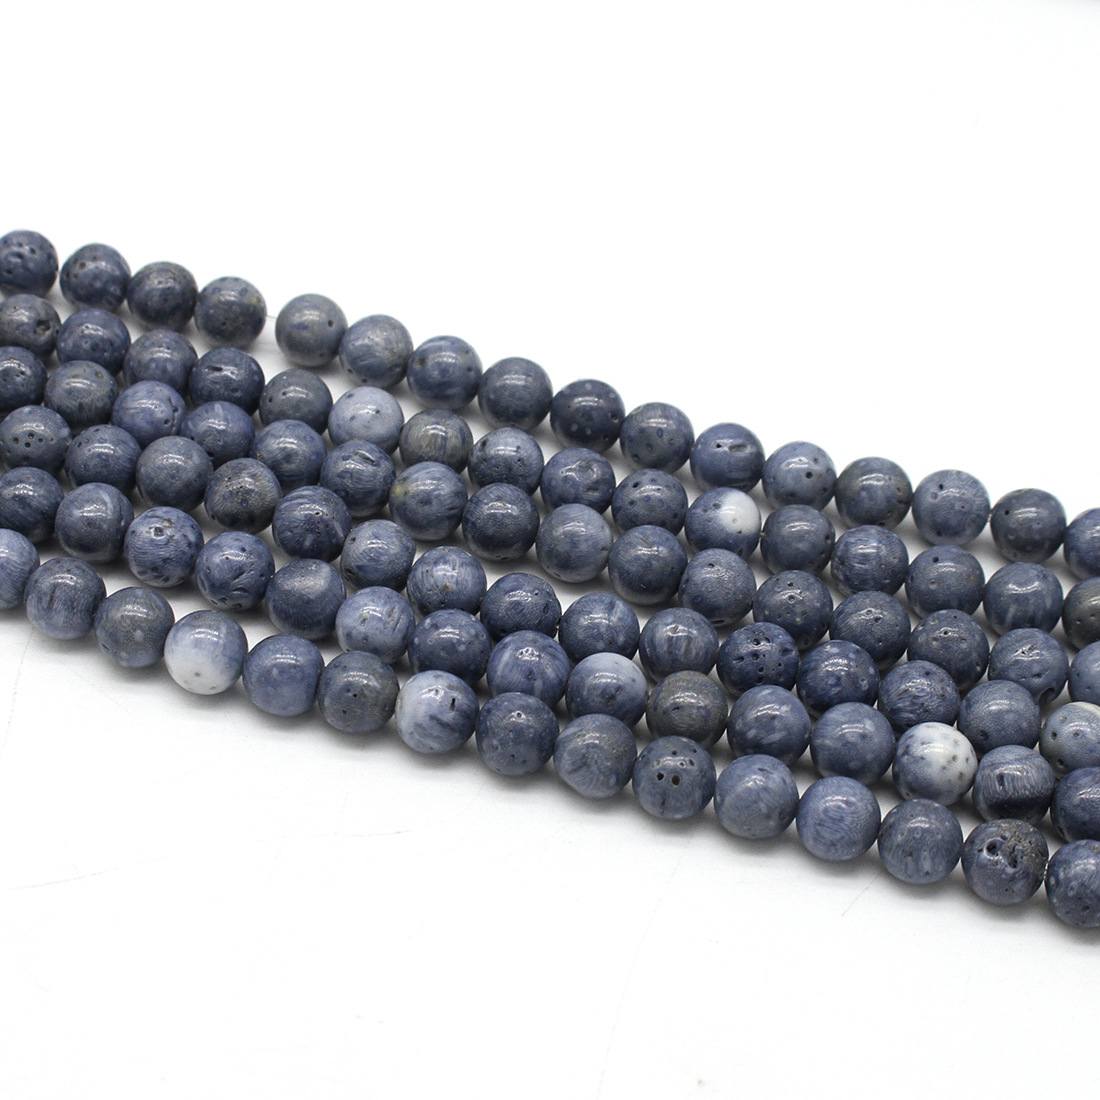 12mm 32 pieces/strand